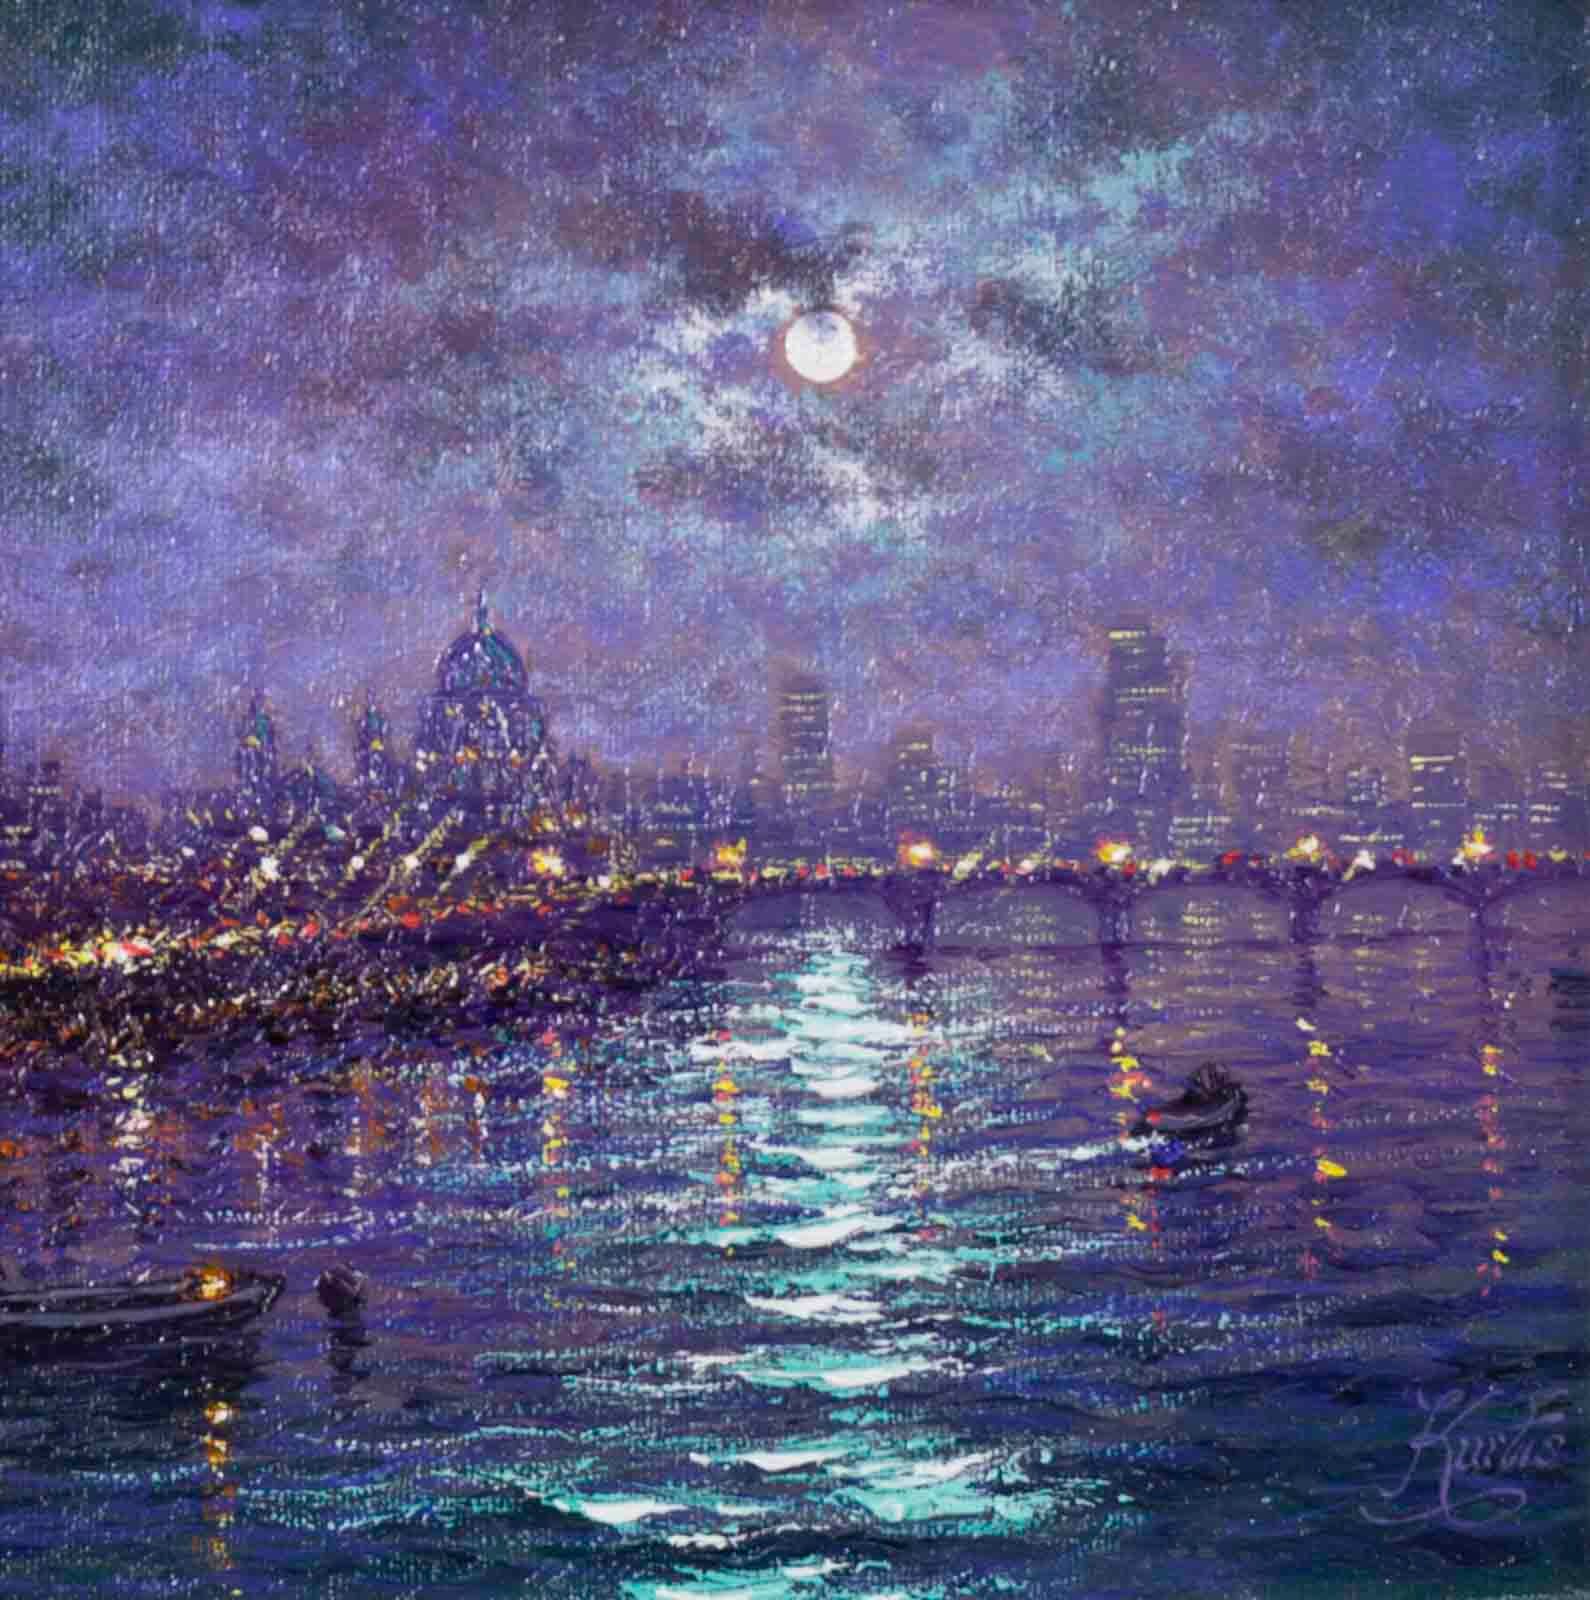 The Thames by Moonlight